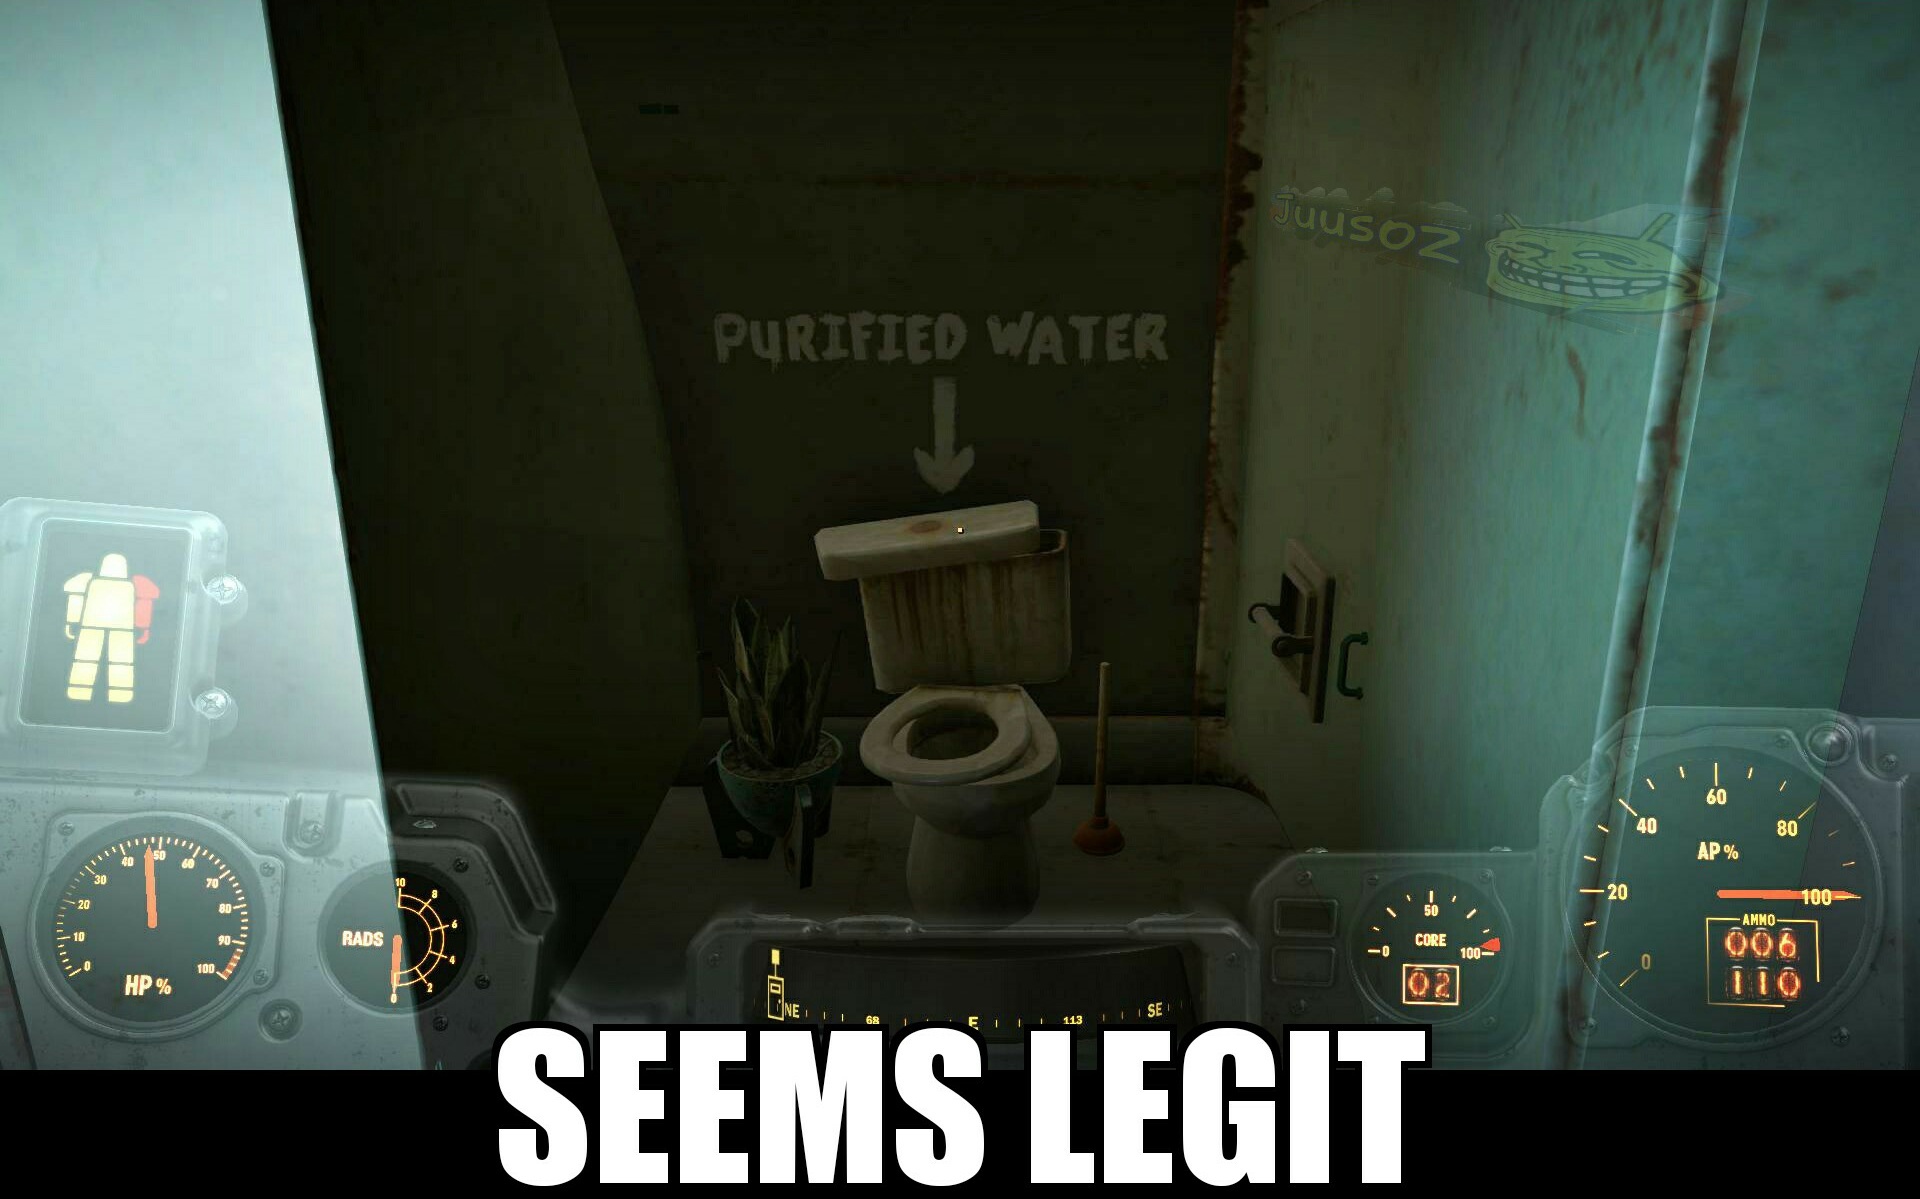 Turns out it was legit. There were 3 bottles of purified water in there. - meme